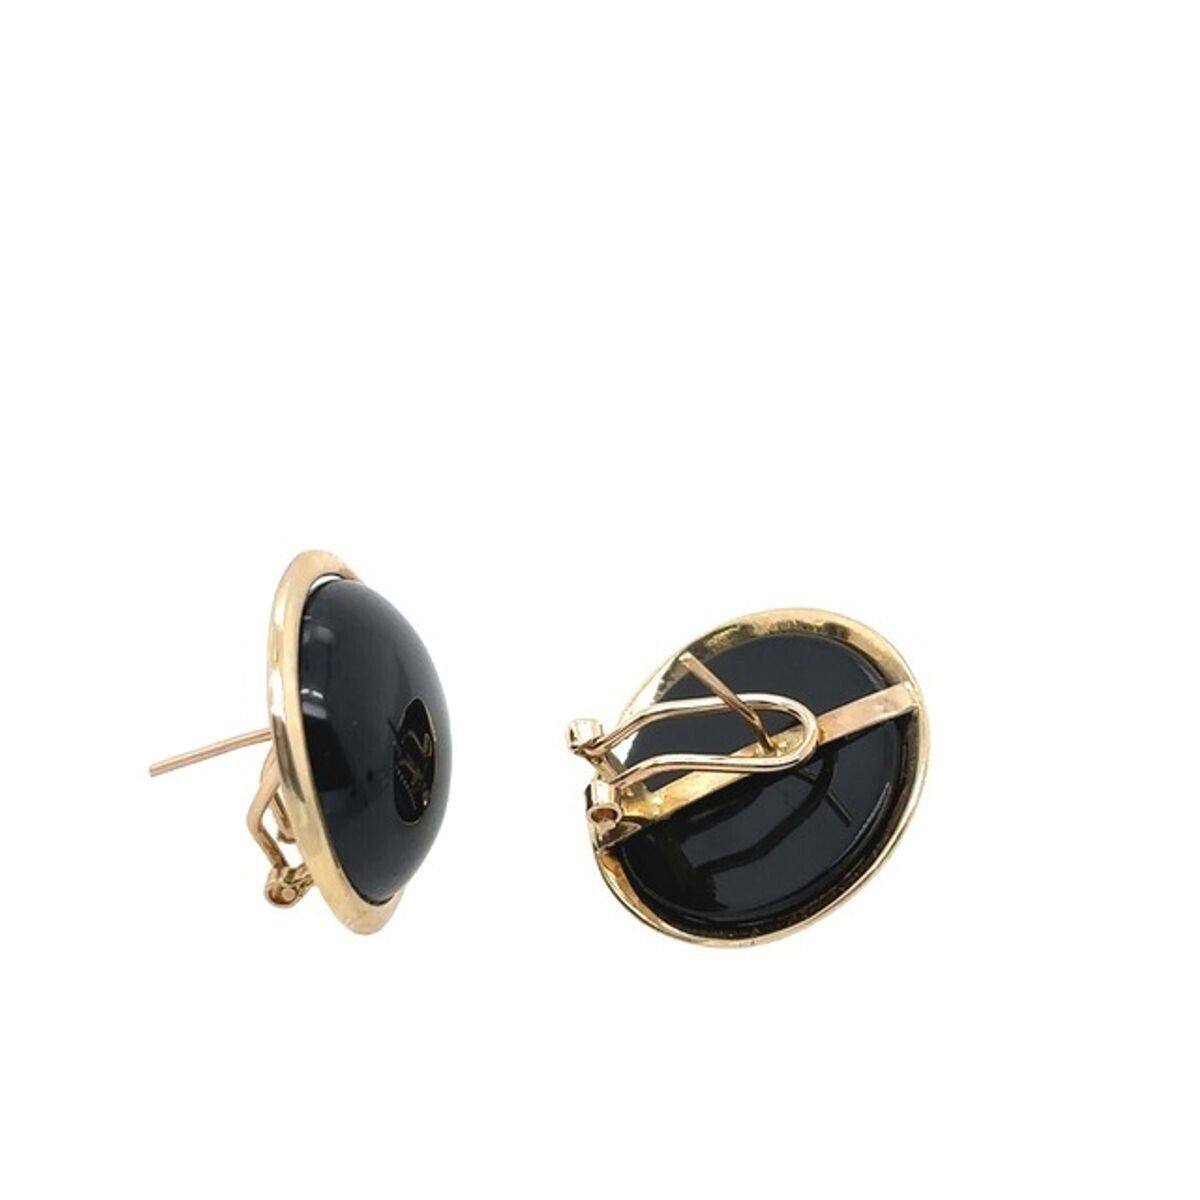 This vintage pair of natural cabochon onyx earrings are beautiful, set in 14ct yellow gold.

Additional Information:
Total Weight: 2.2g
Earrings Dimension: 9mm
SMS8555 